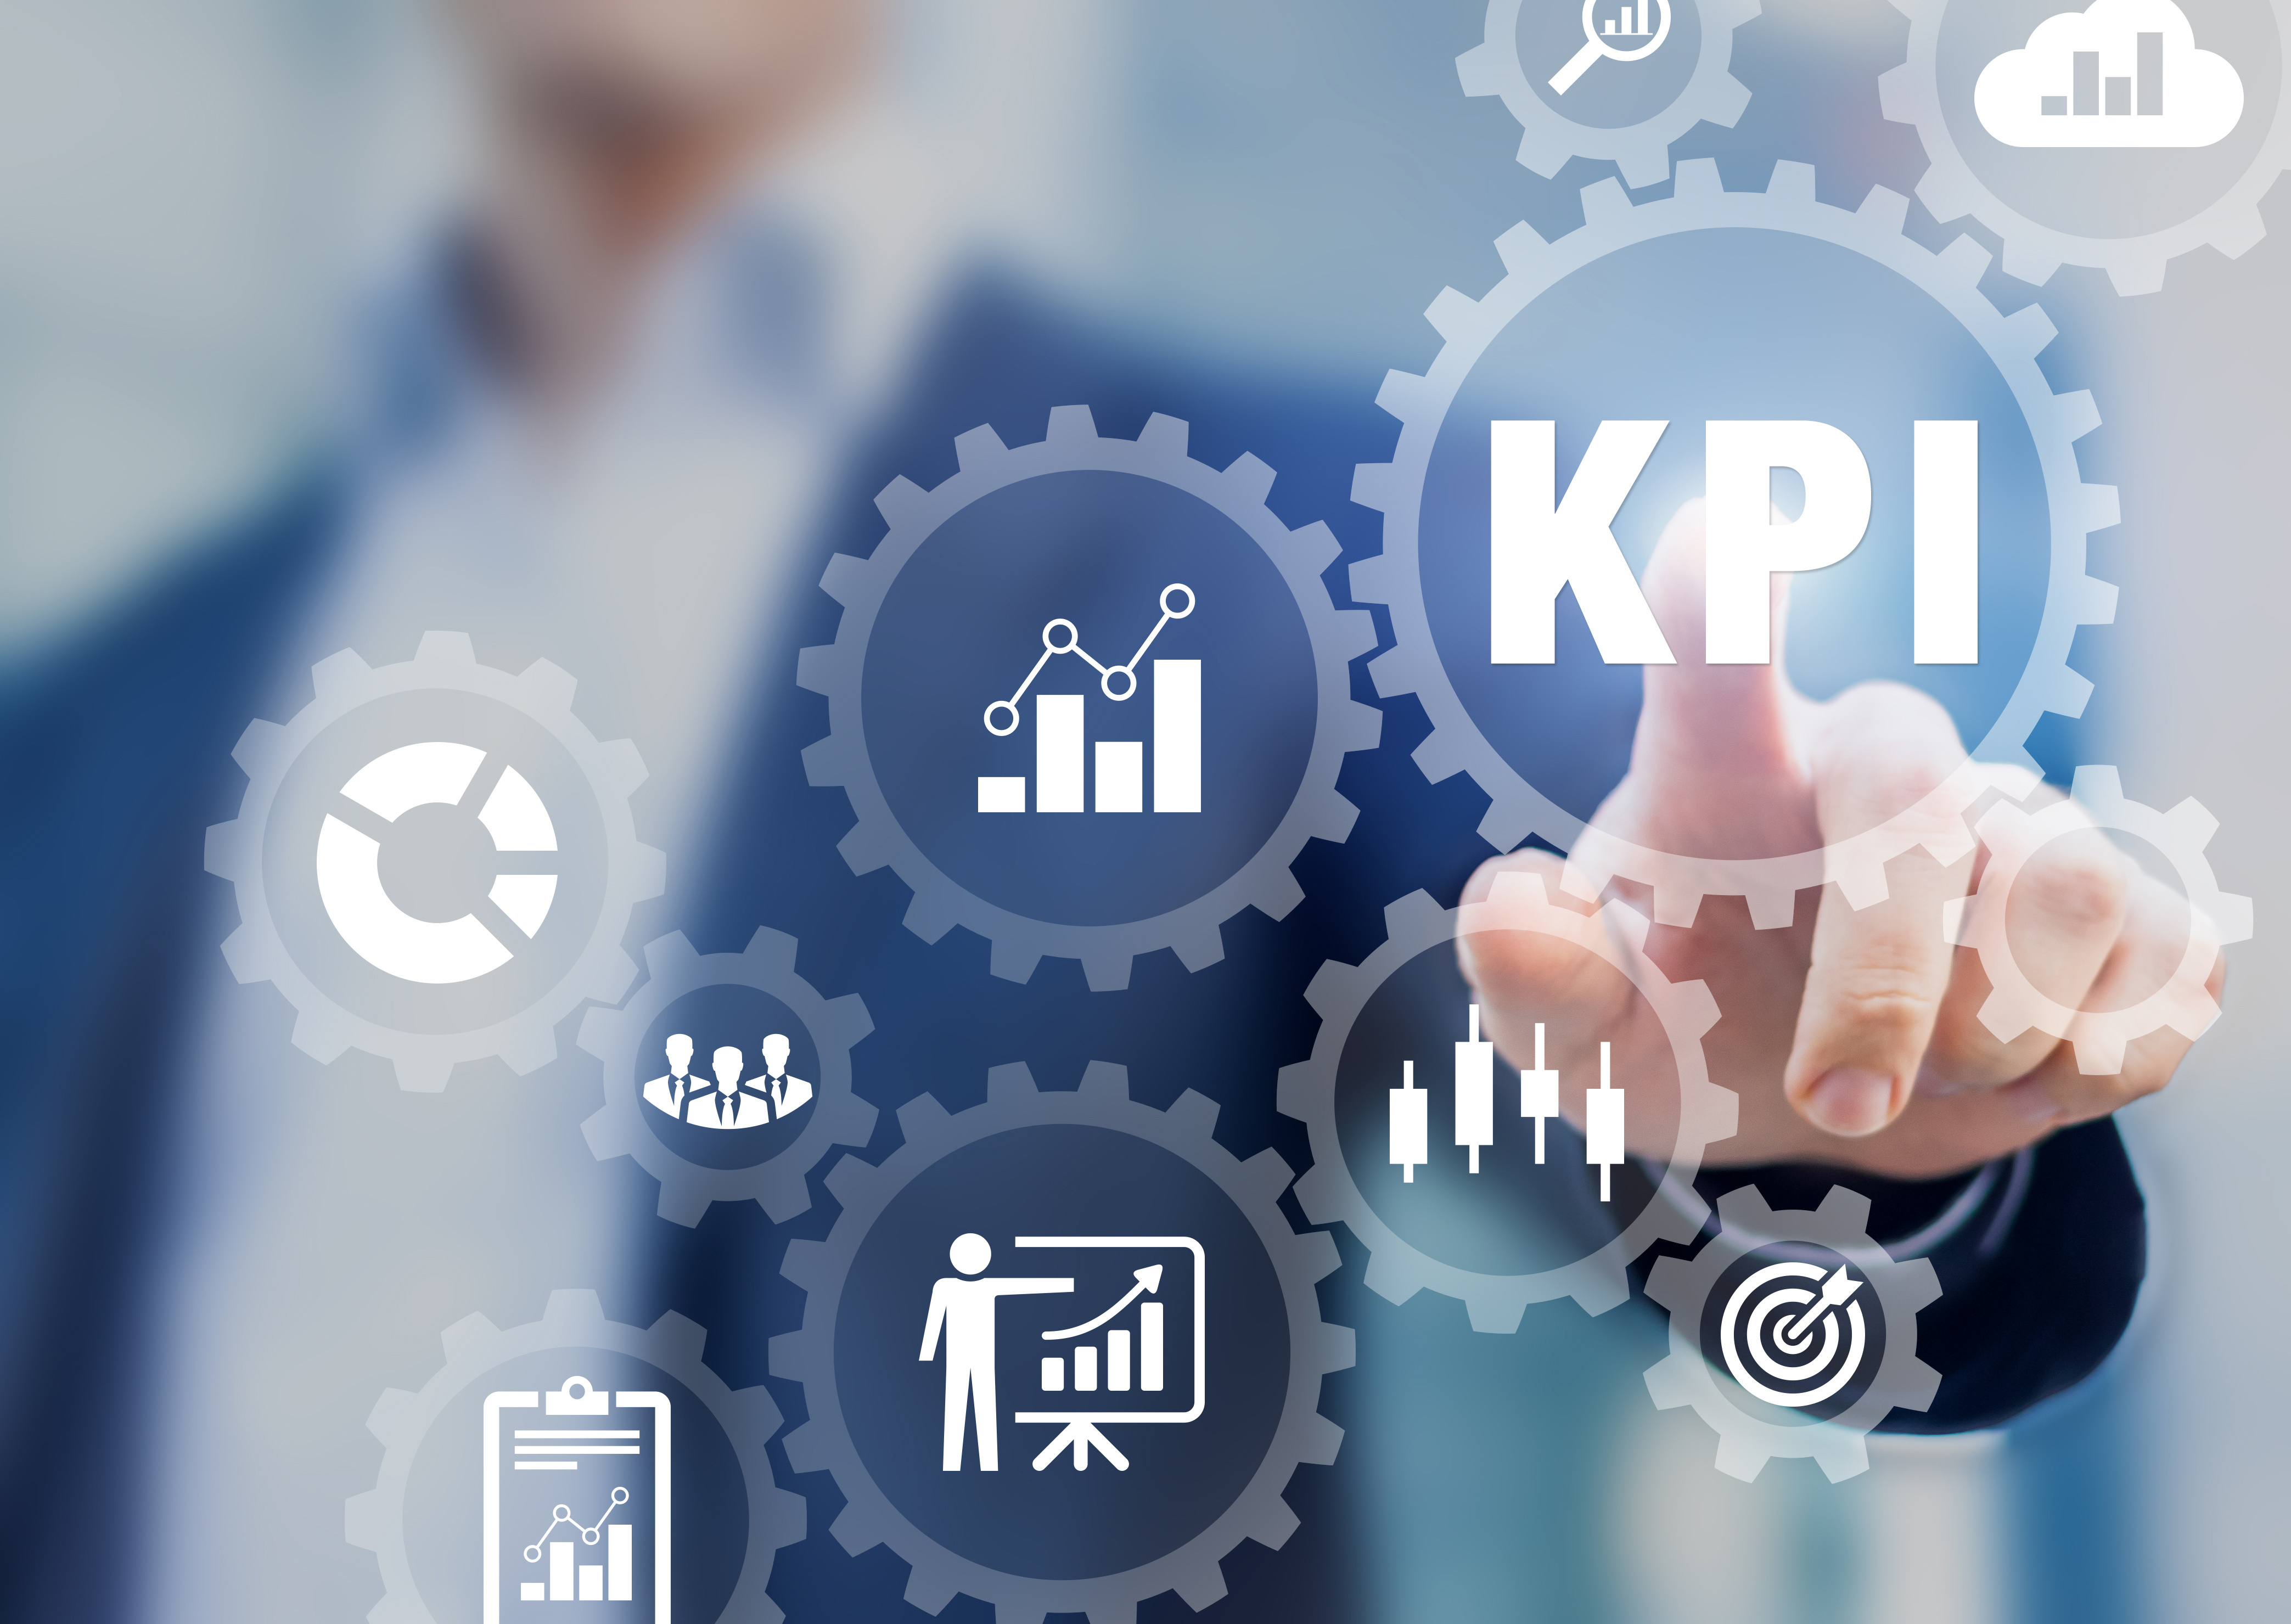 KPI Key Performance Indicators presentation, business development strategy, metrics measuring production, sales, efficiency against planned targeted achievements, BI consultant touching icons